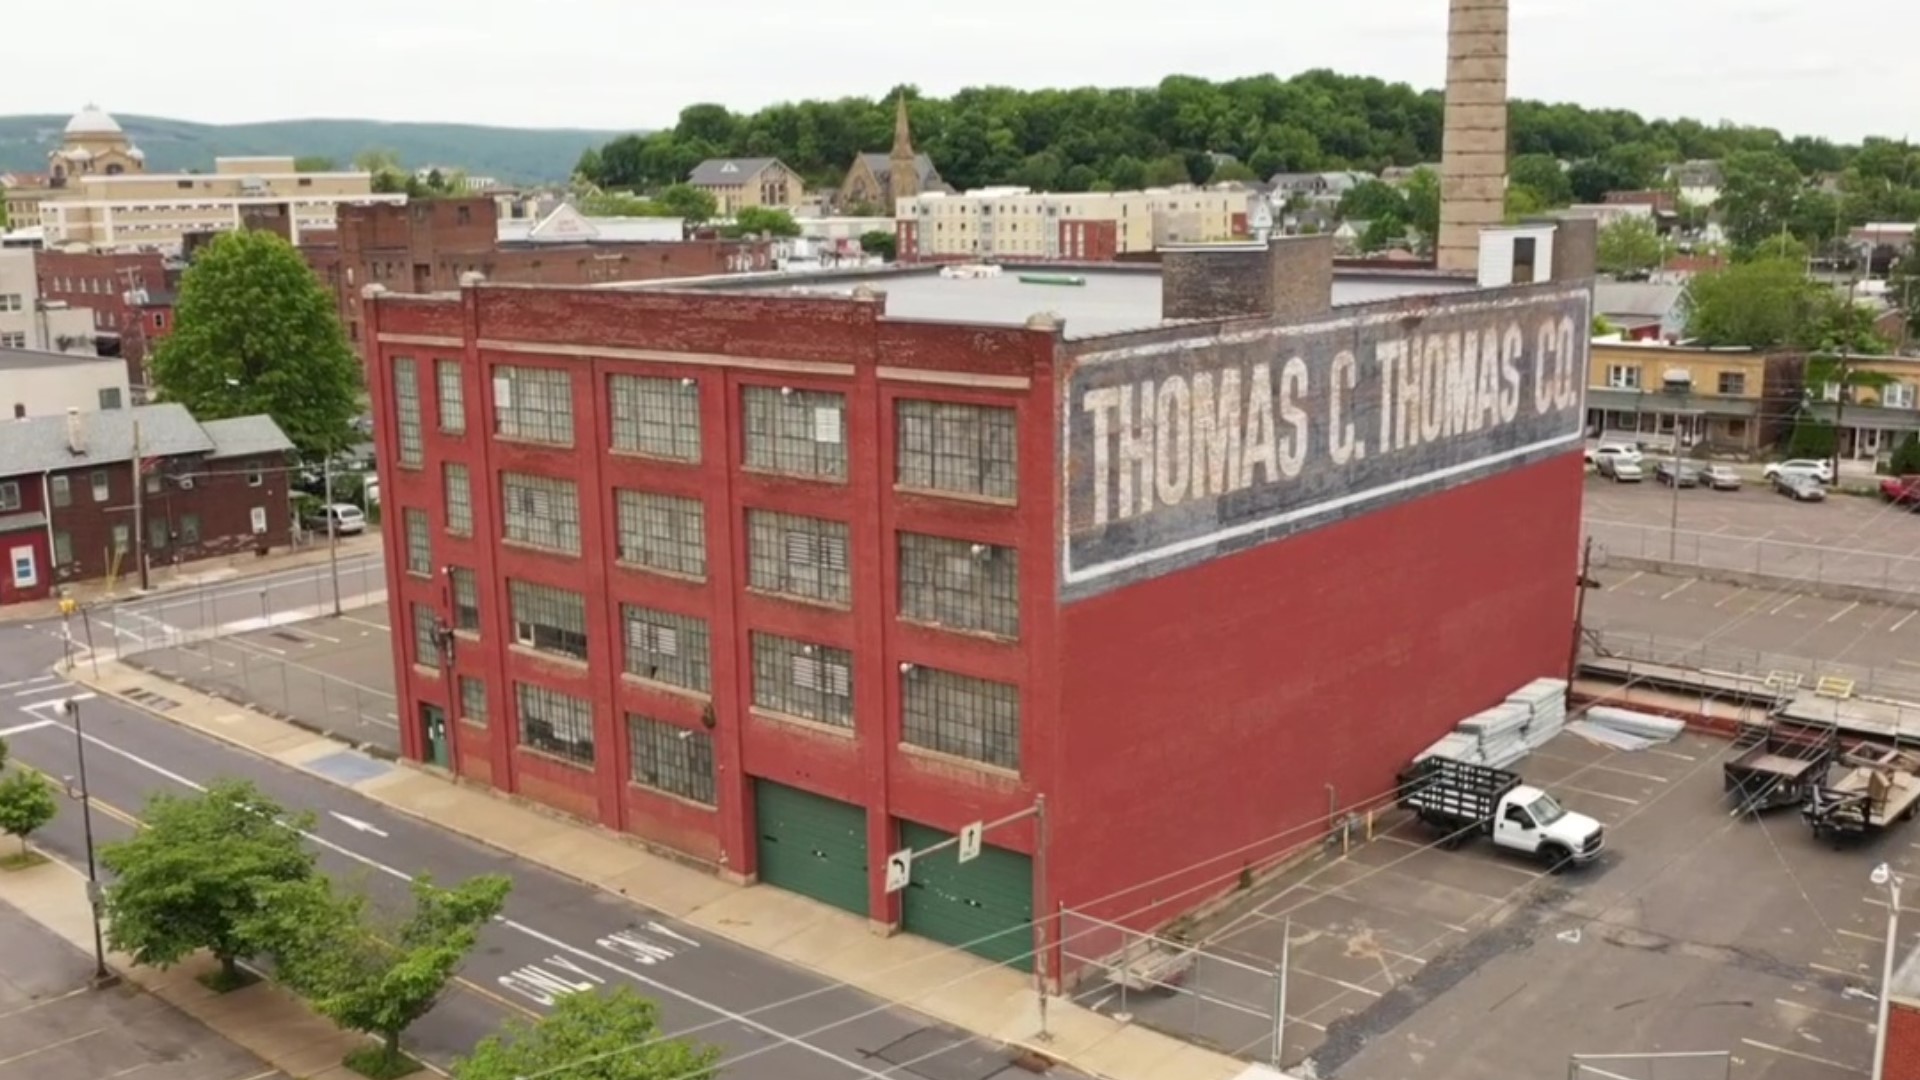 Organizers want to transform the former Thomas C. Thomas building on East Union Street.